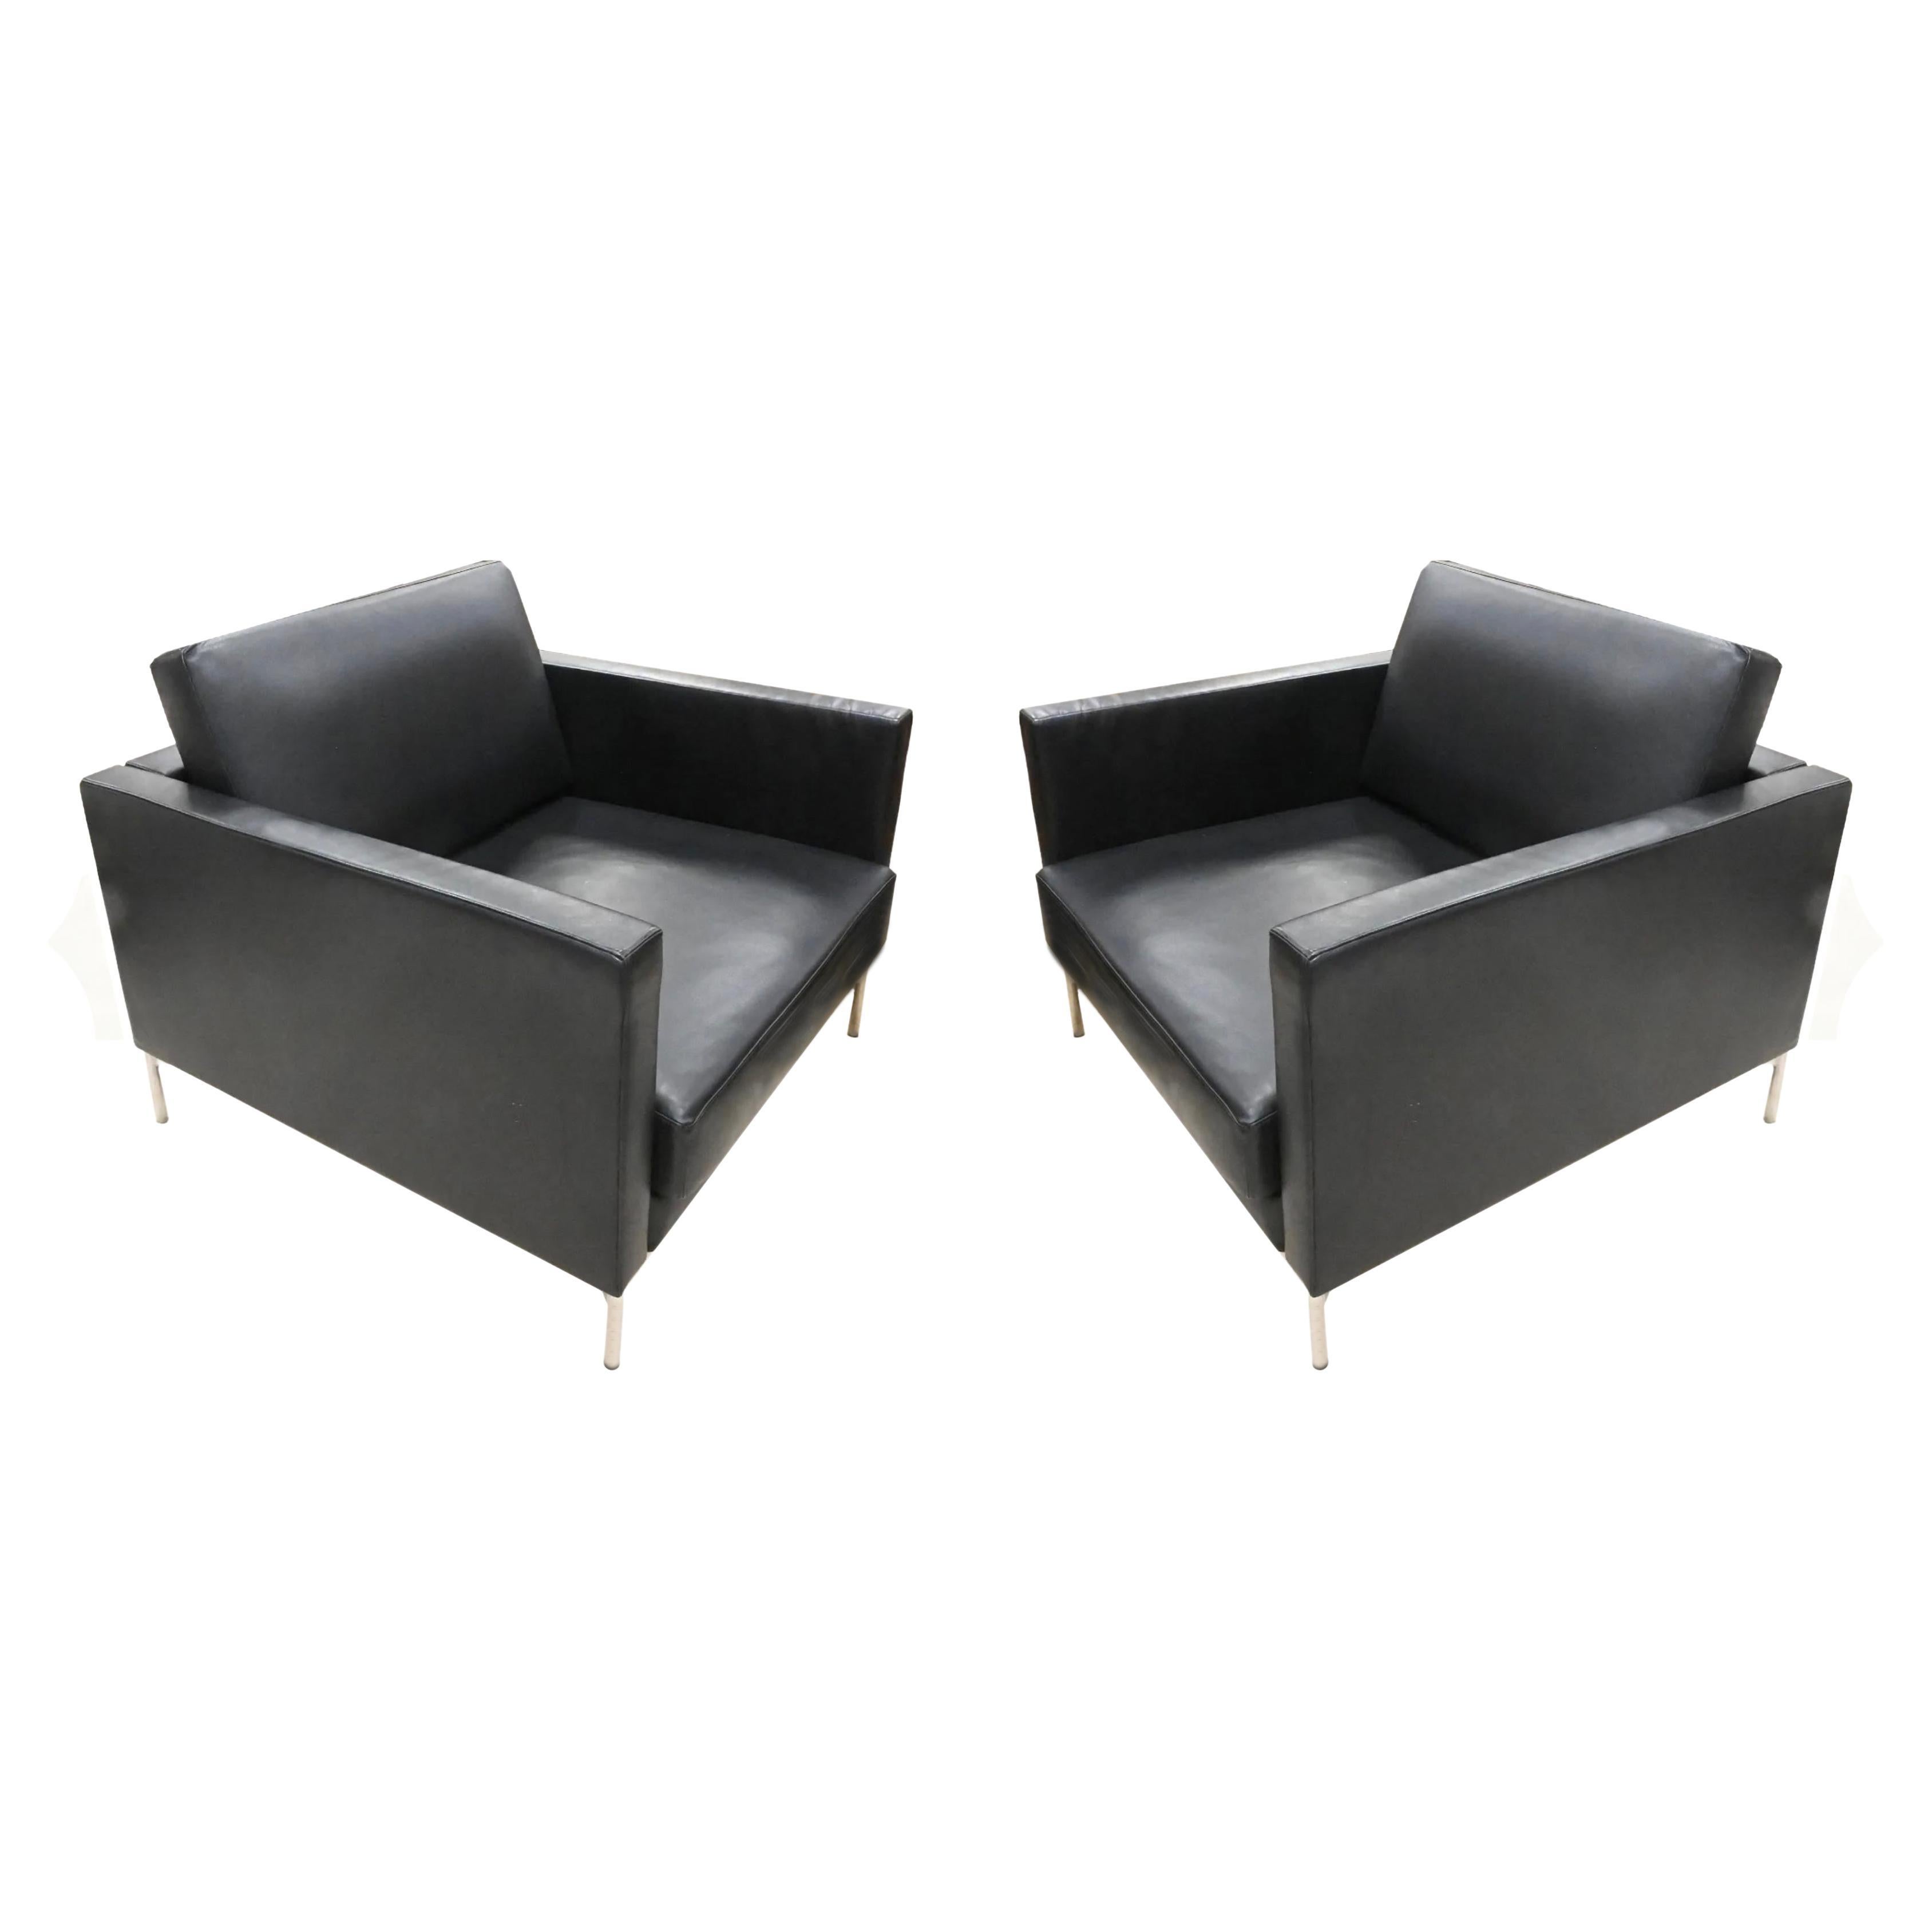 Modern Pre Owned Piero Lissoni for Knoll Divina Club Lounge Chair in Black Leather. Clean lines and exceptional comfort characterize the Divina Lounge Chair from Italy’s Piero Lissoni. Generous armrests fully enclose each side of the chair, which